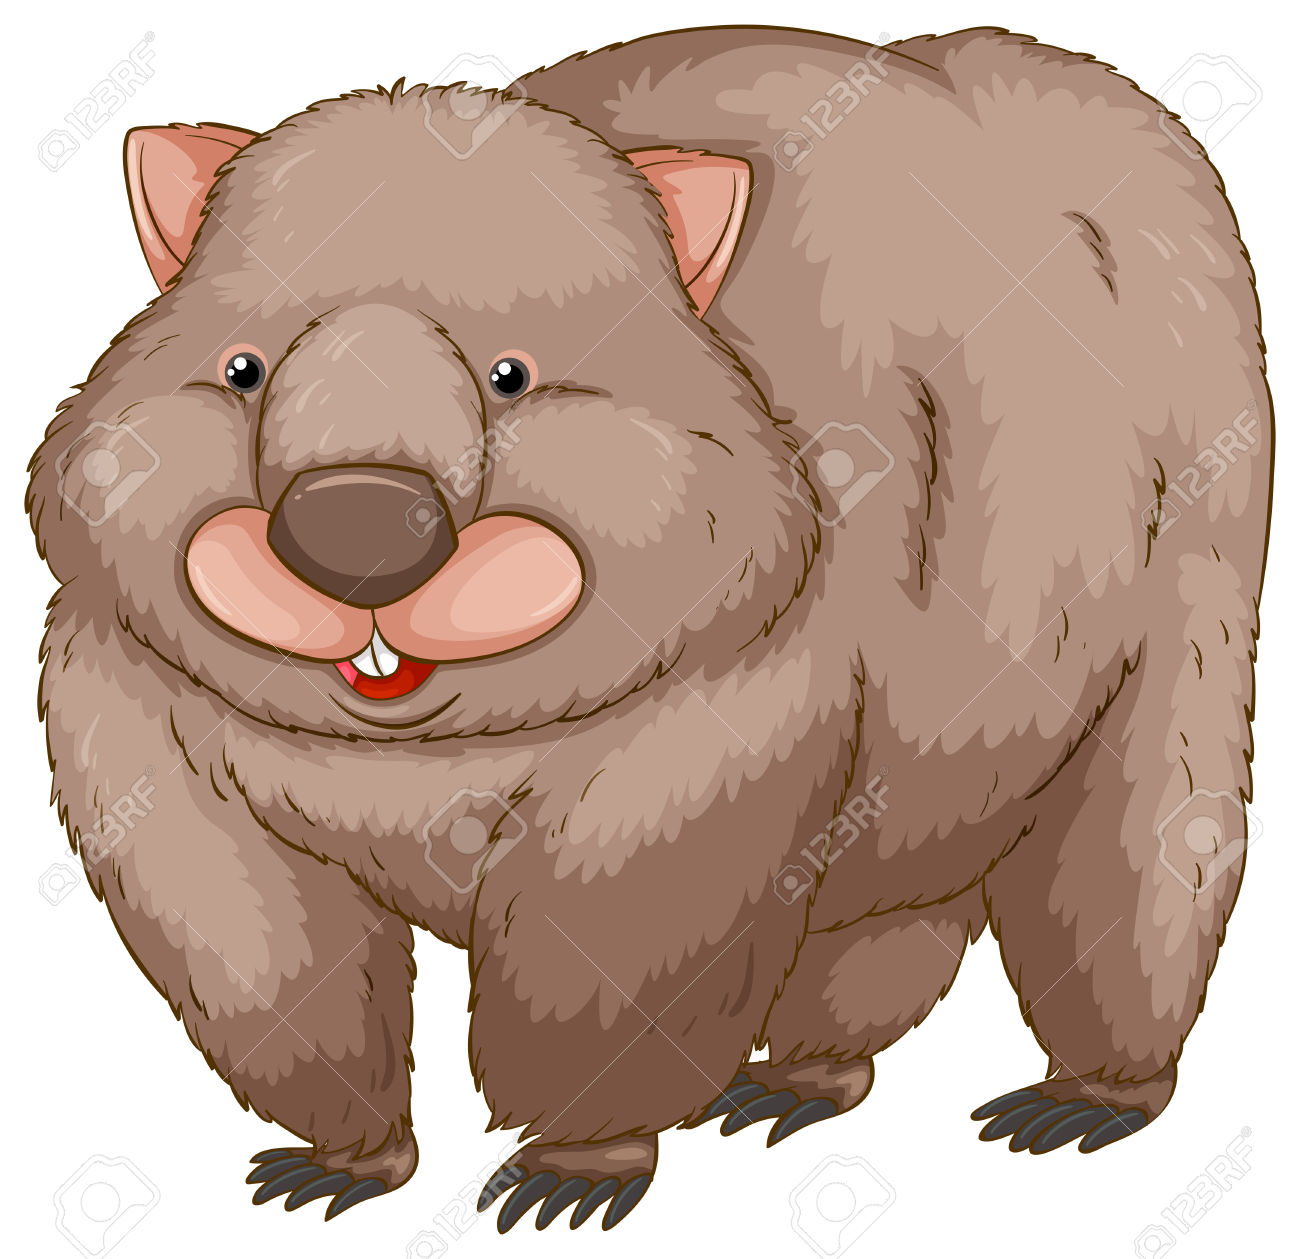 A Wombat On A White Background Royalty Free Cliparts, Vectors, And.